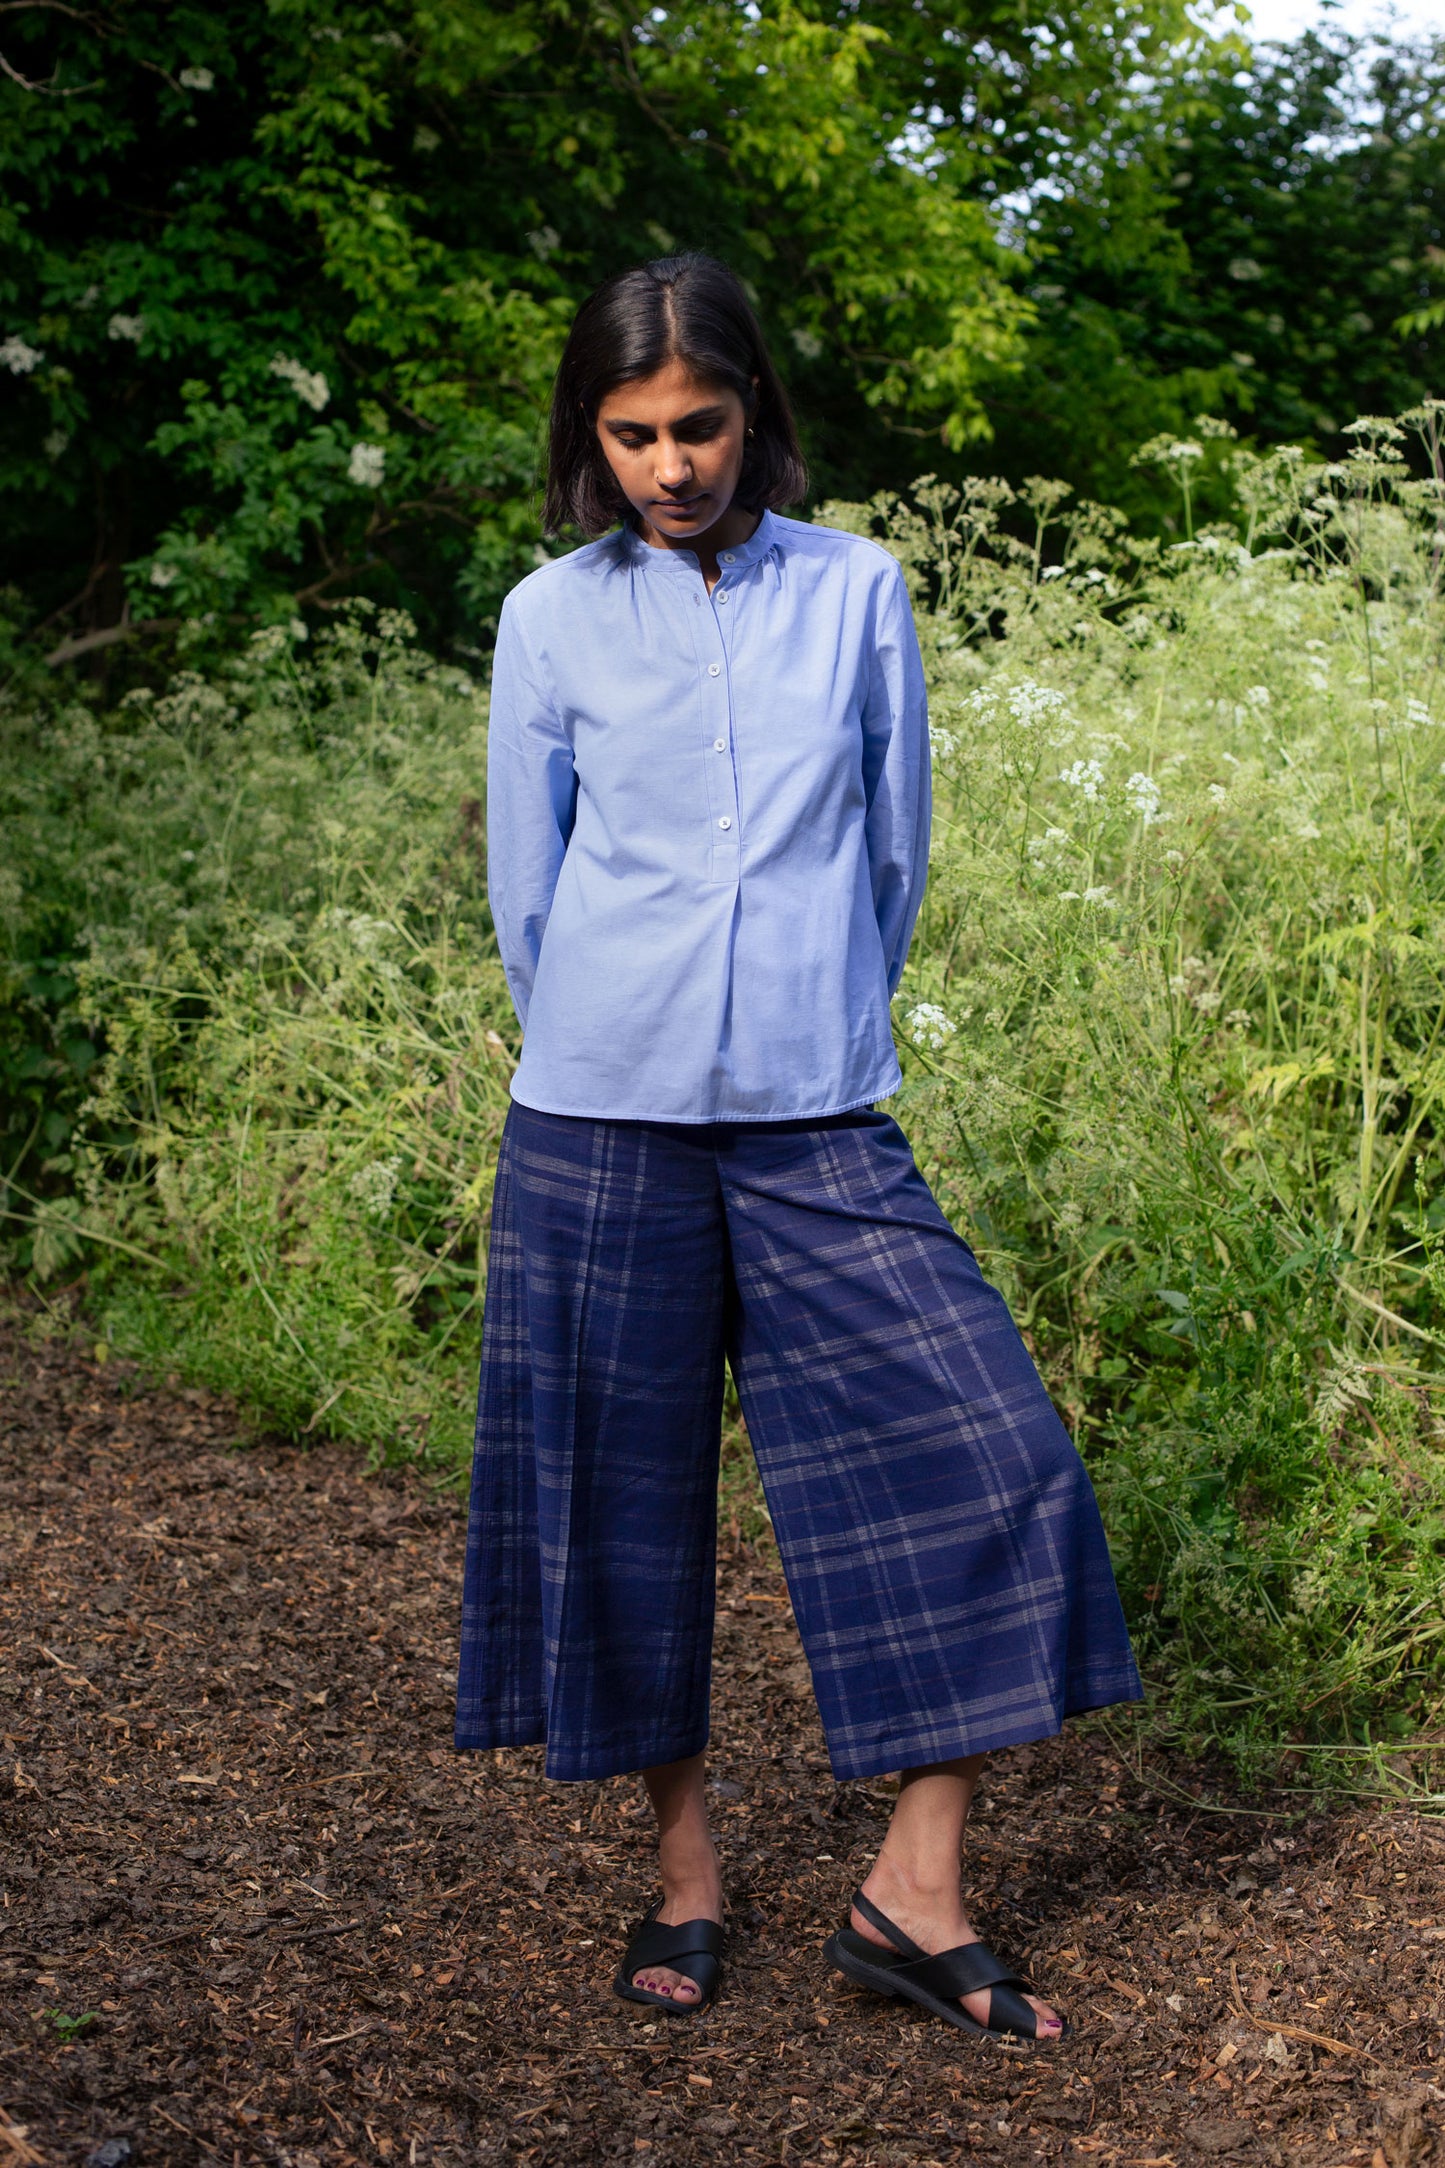 Full length shot of model wearing Saywood's Amelia check trousers, wide leg culotte shape in navy check, with black sandals. Worn with the pale blue shirt, the Marie a-line blouse. She is standing outside surrounded by wild plants and greenery.